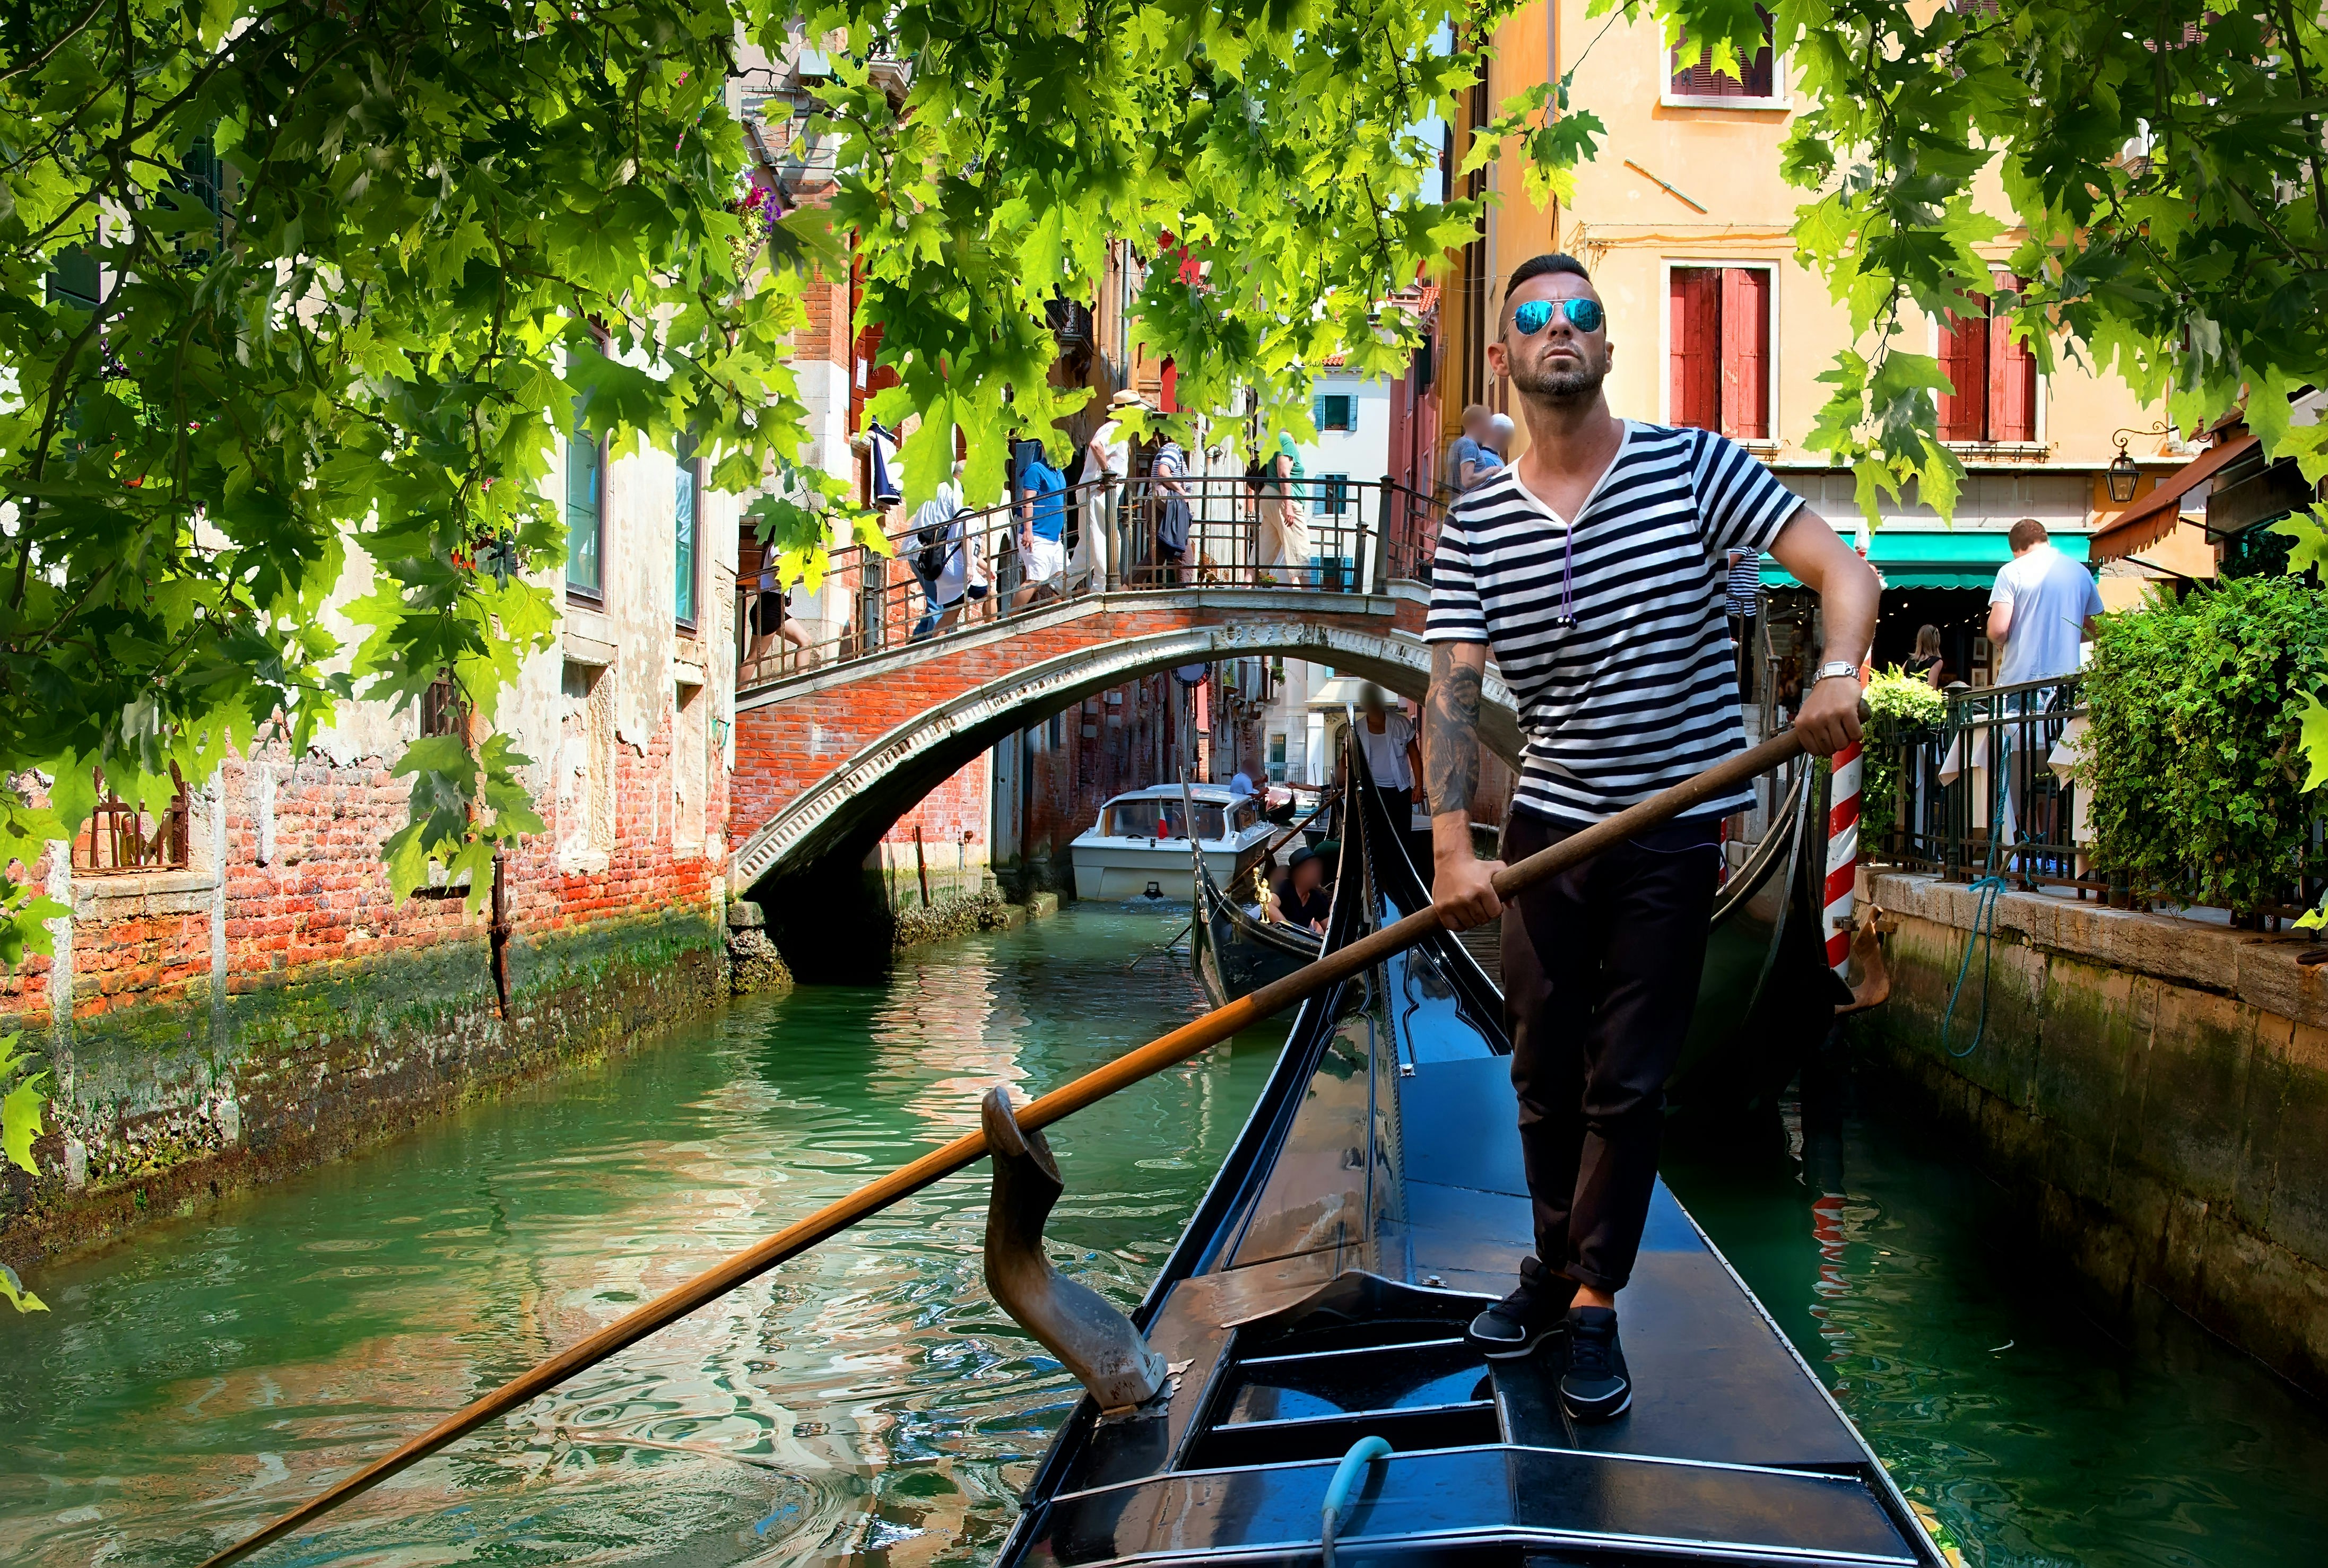 A male gondolier steers a boat through a narrow canal in Venice. The gondolier wears a black and white striped t-shirt, with black trousers. In the background, a number of people can be seen walking across a bridge that spans the canal.